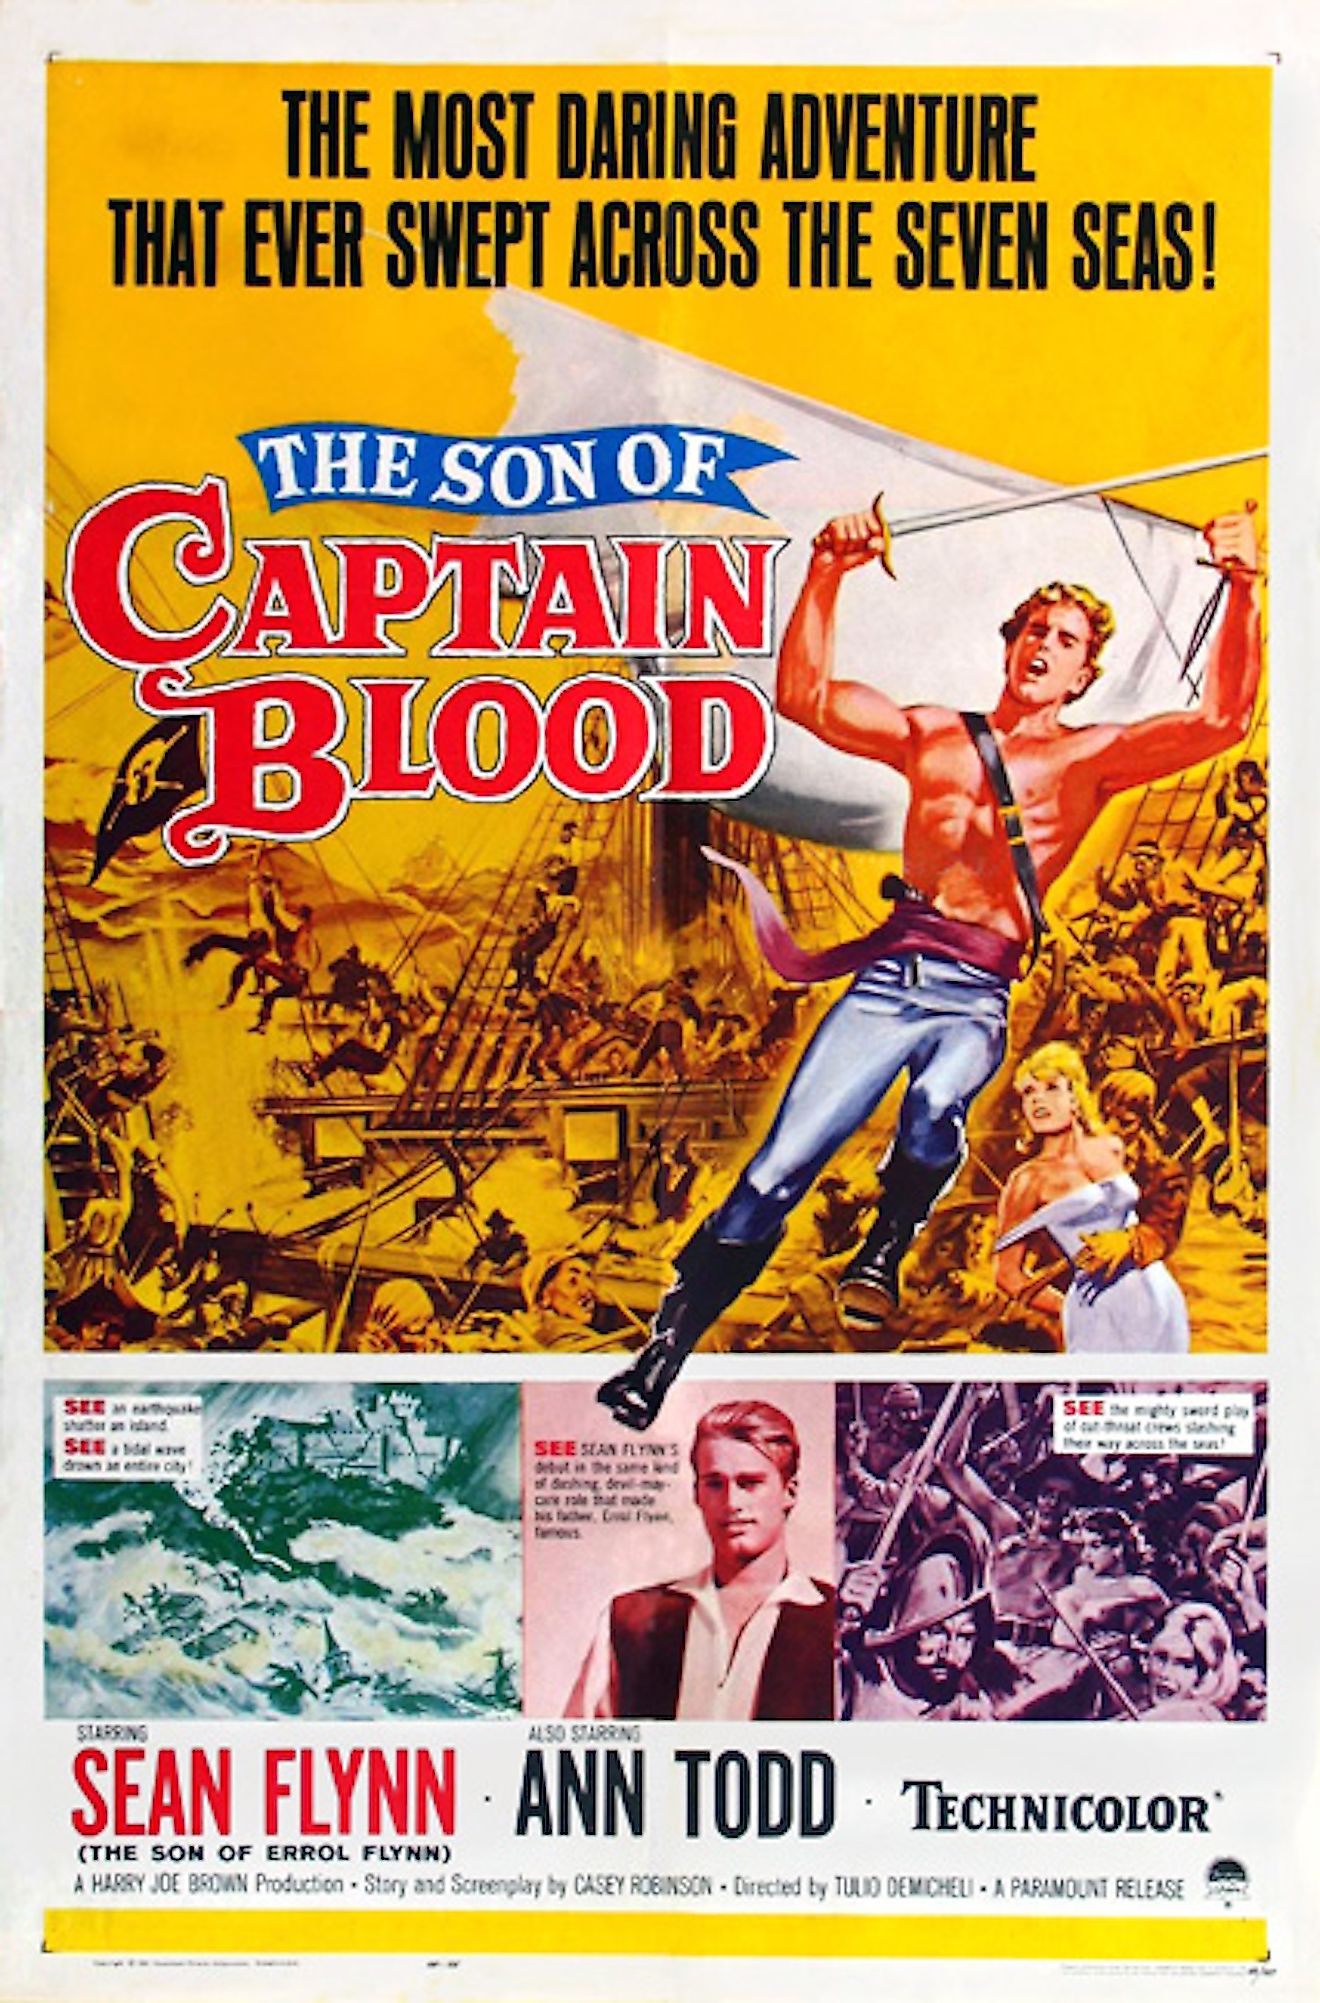 The Son of Captain Blood film poster.